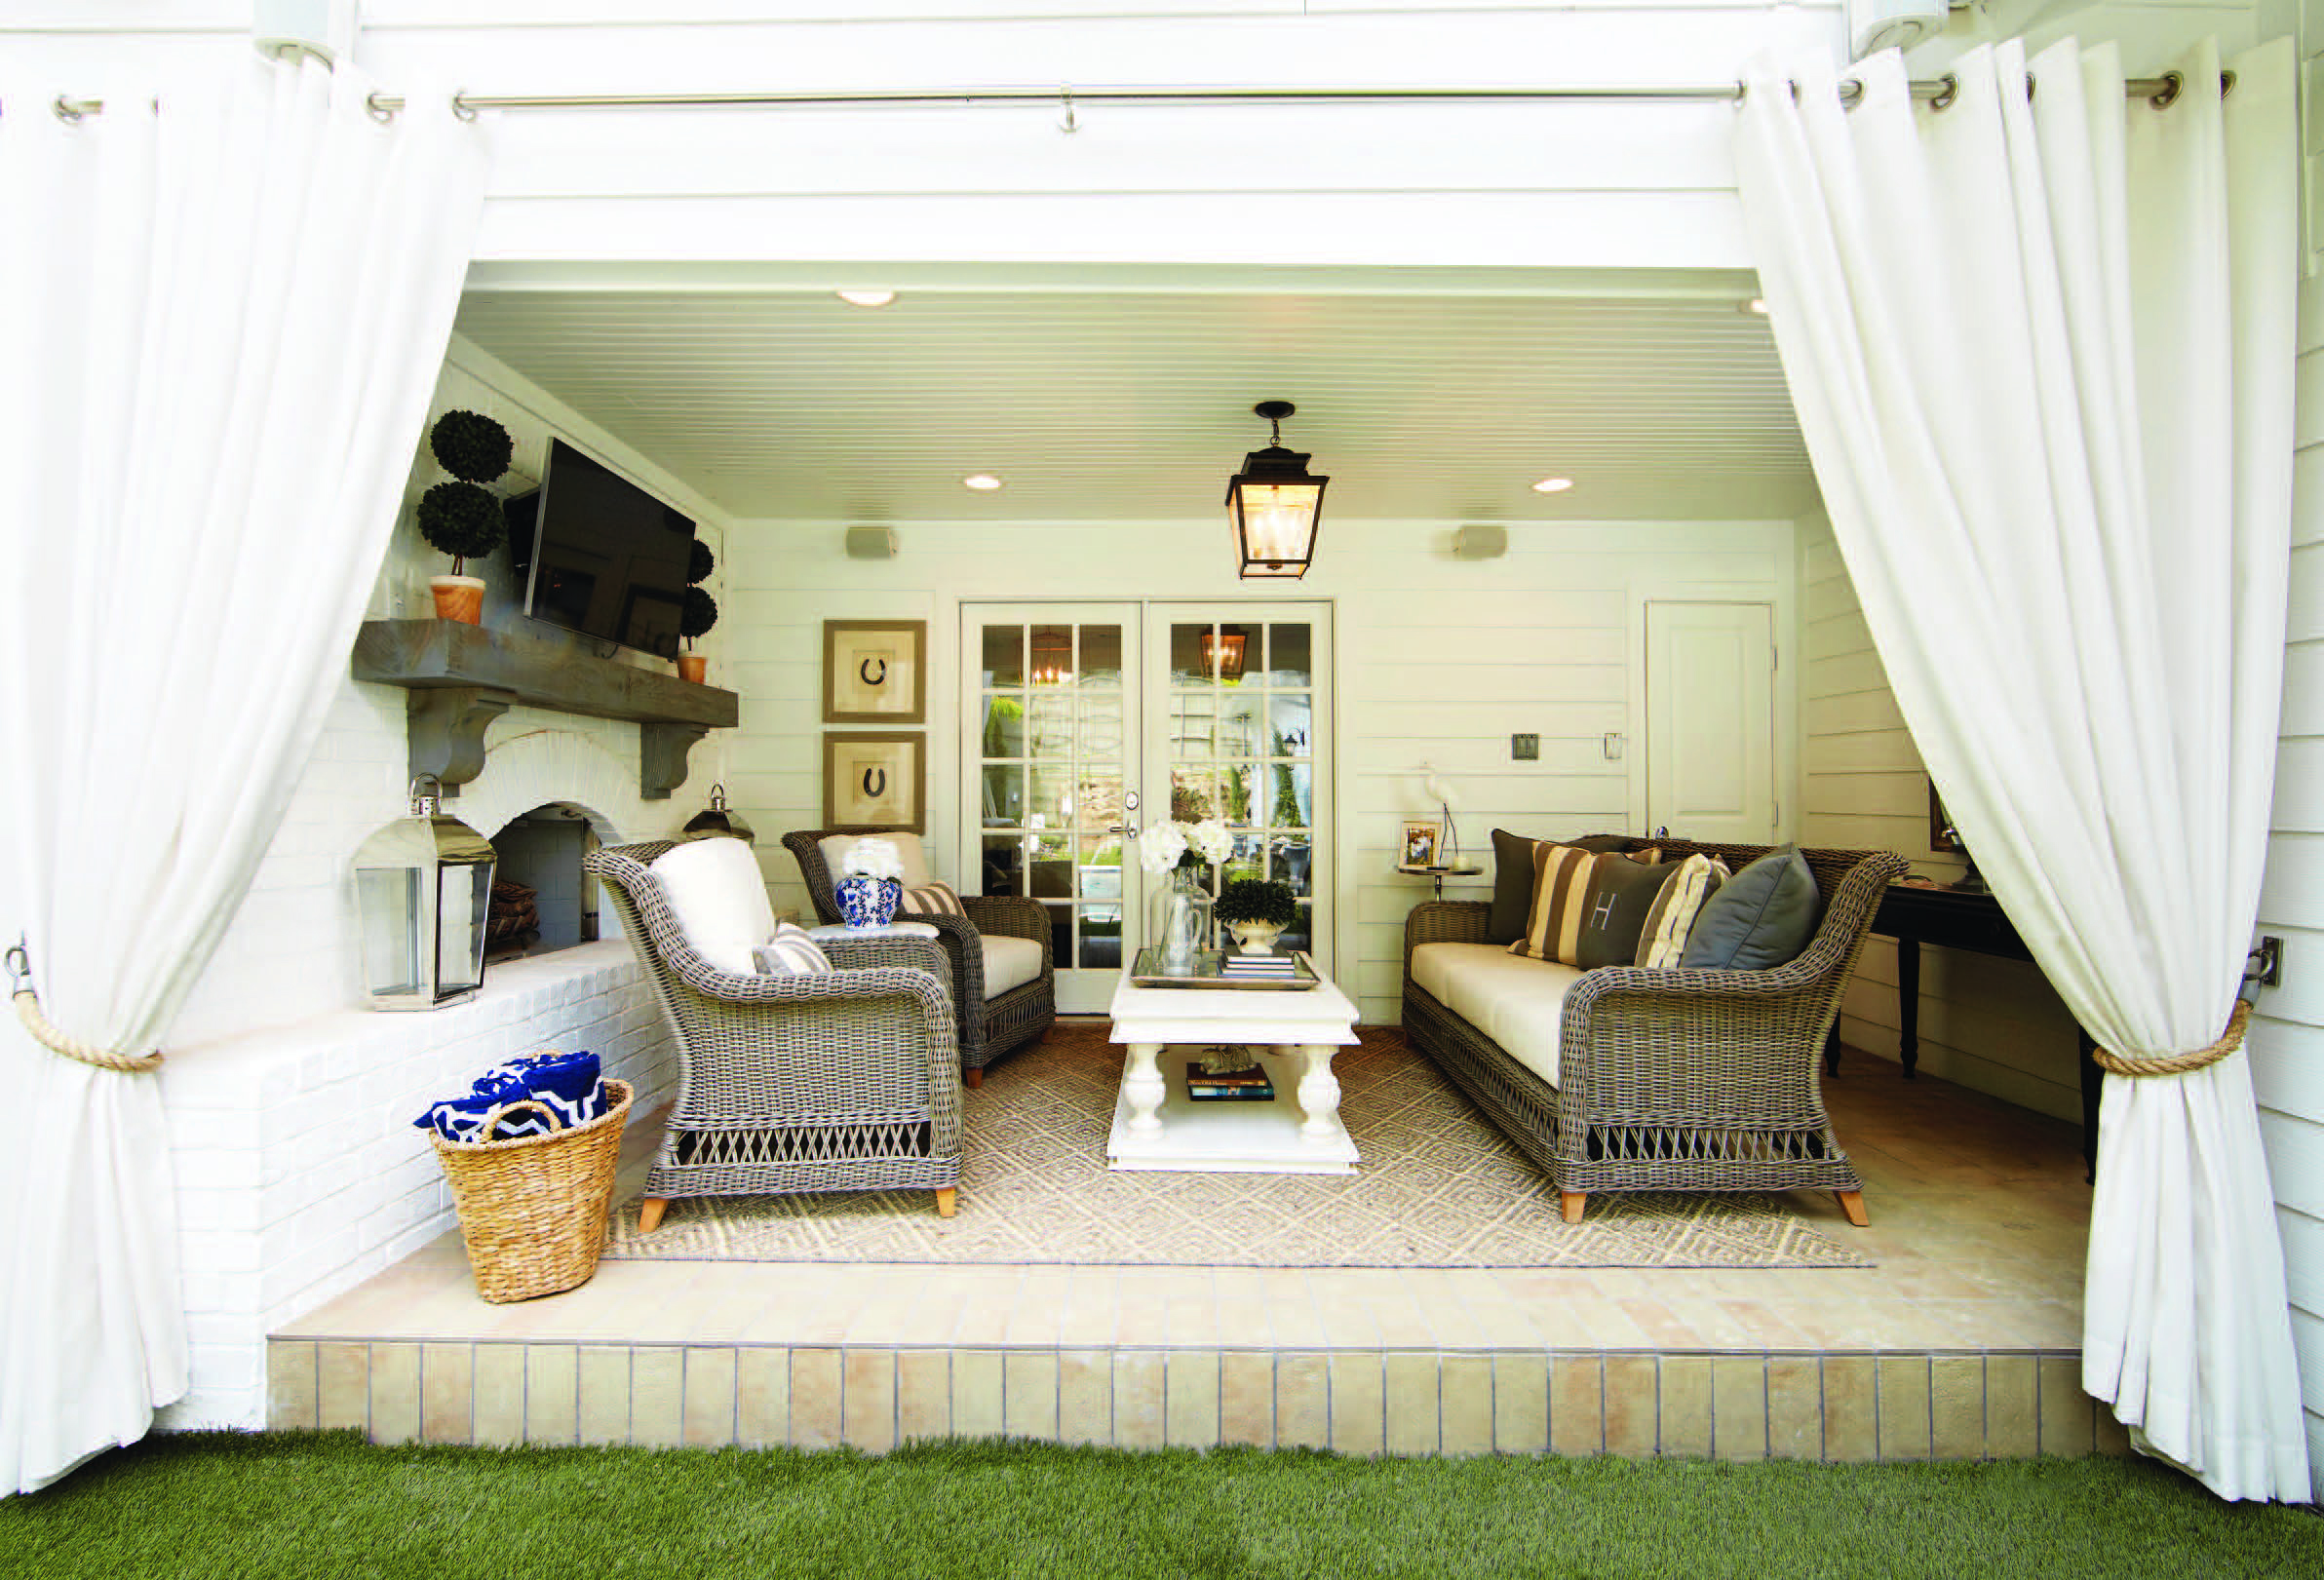 A wall was removed to transform this interior room into an indoor/outdoor cabana space that the family uses year round.